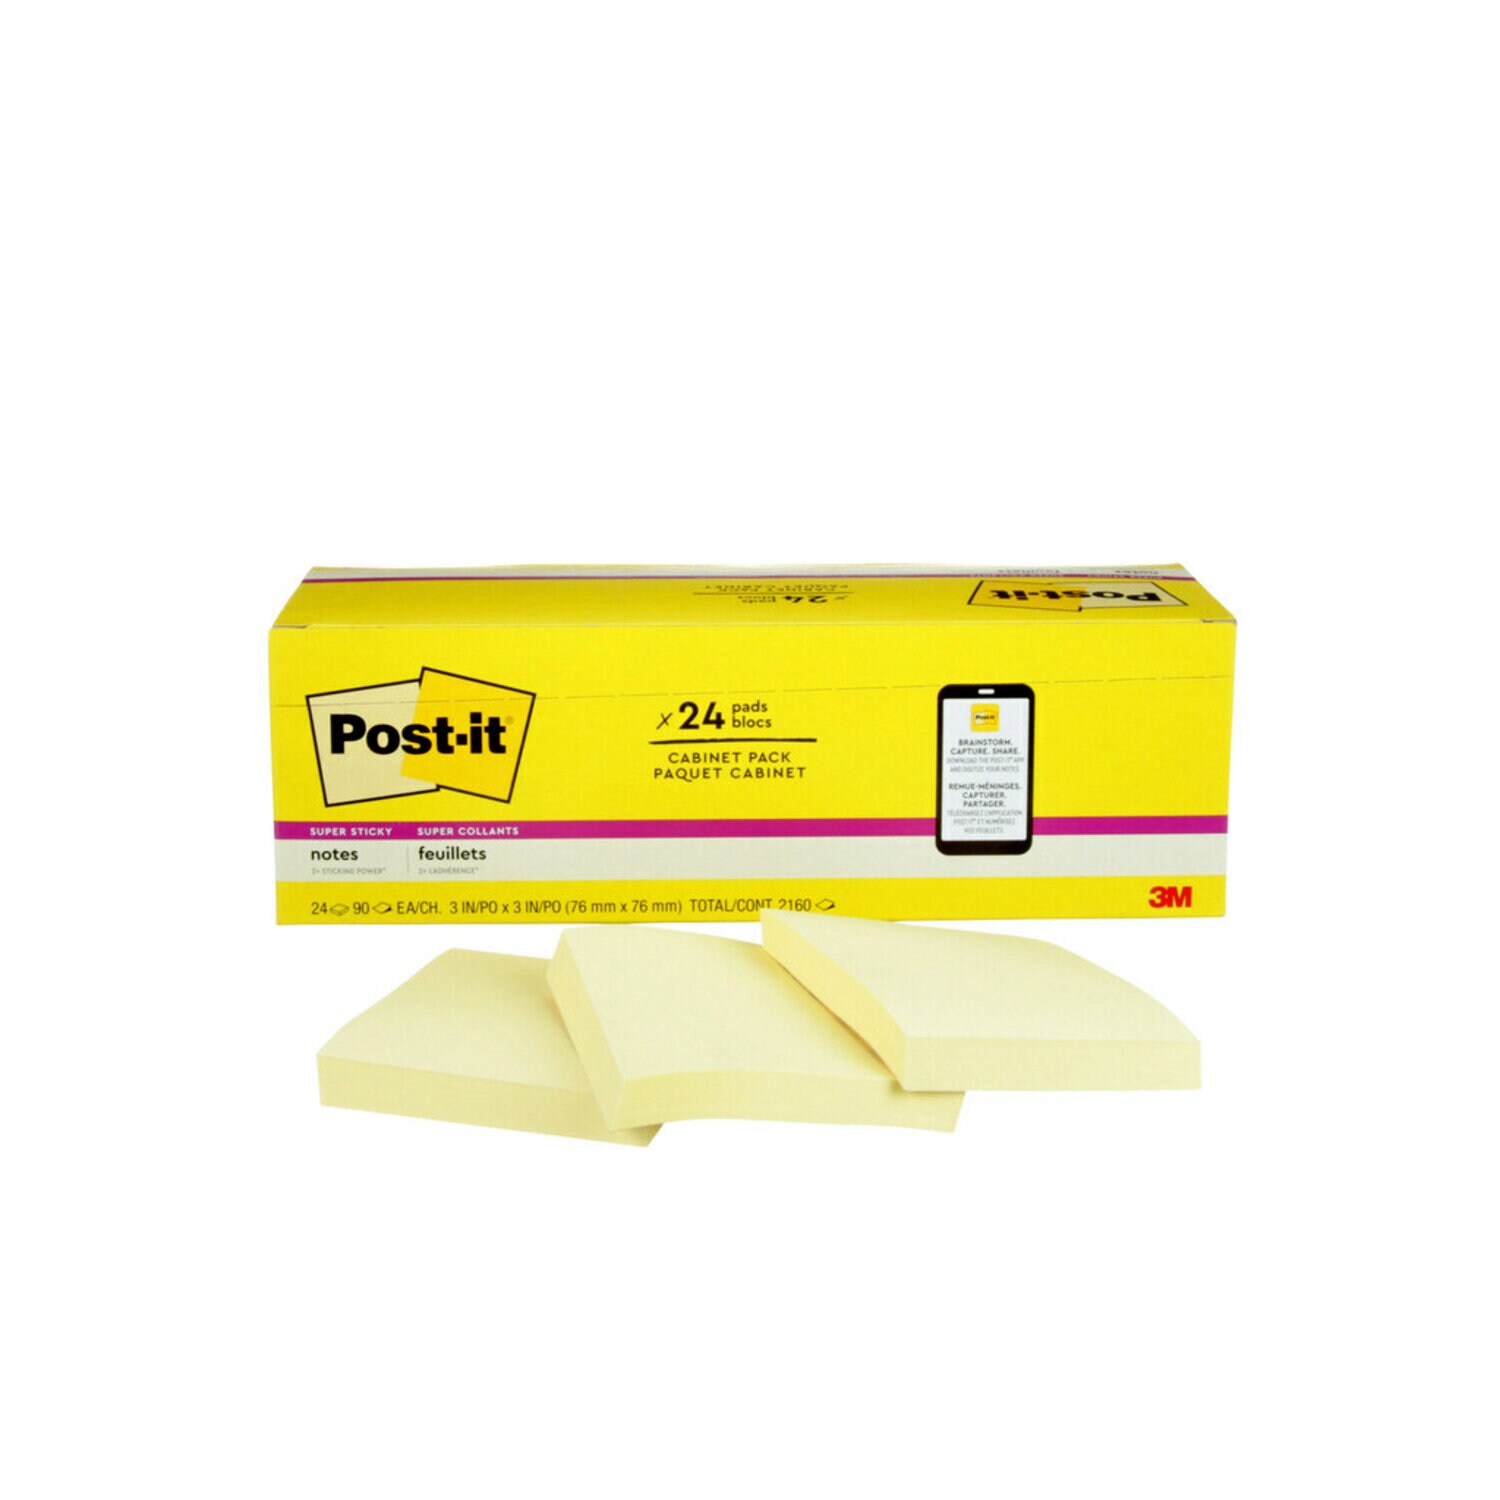 7100242070 - Post-it Super Sticky Notes 654-24SSCP, 3 in x 3 in (76 mm x 76
mm)Canary